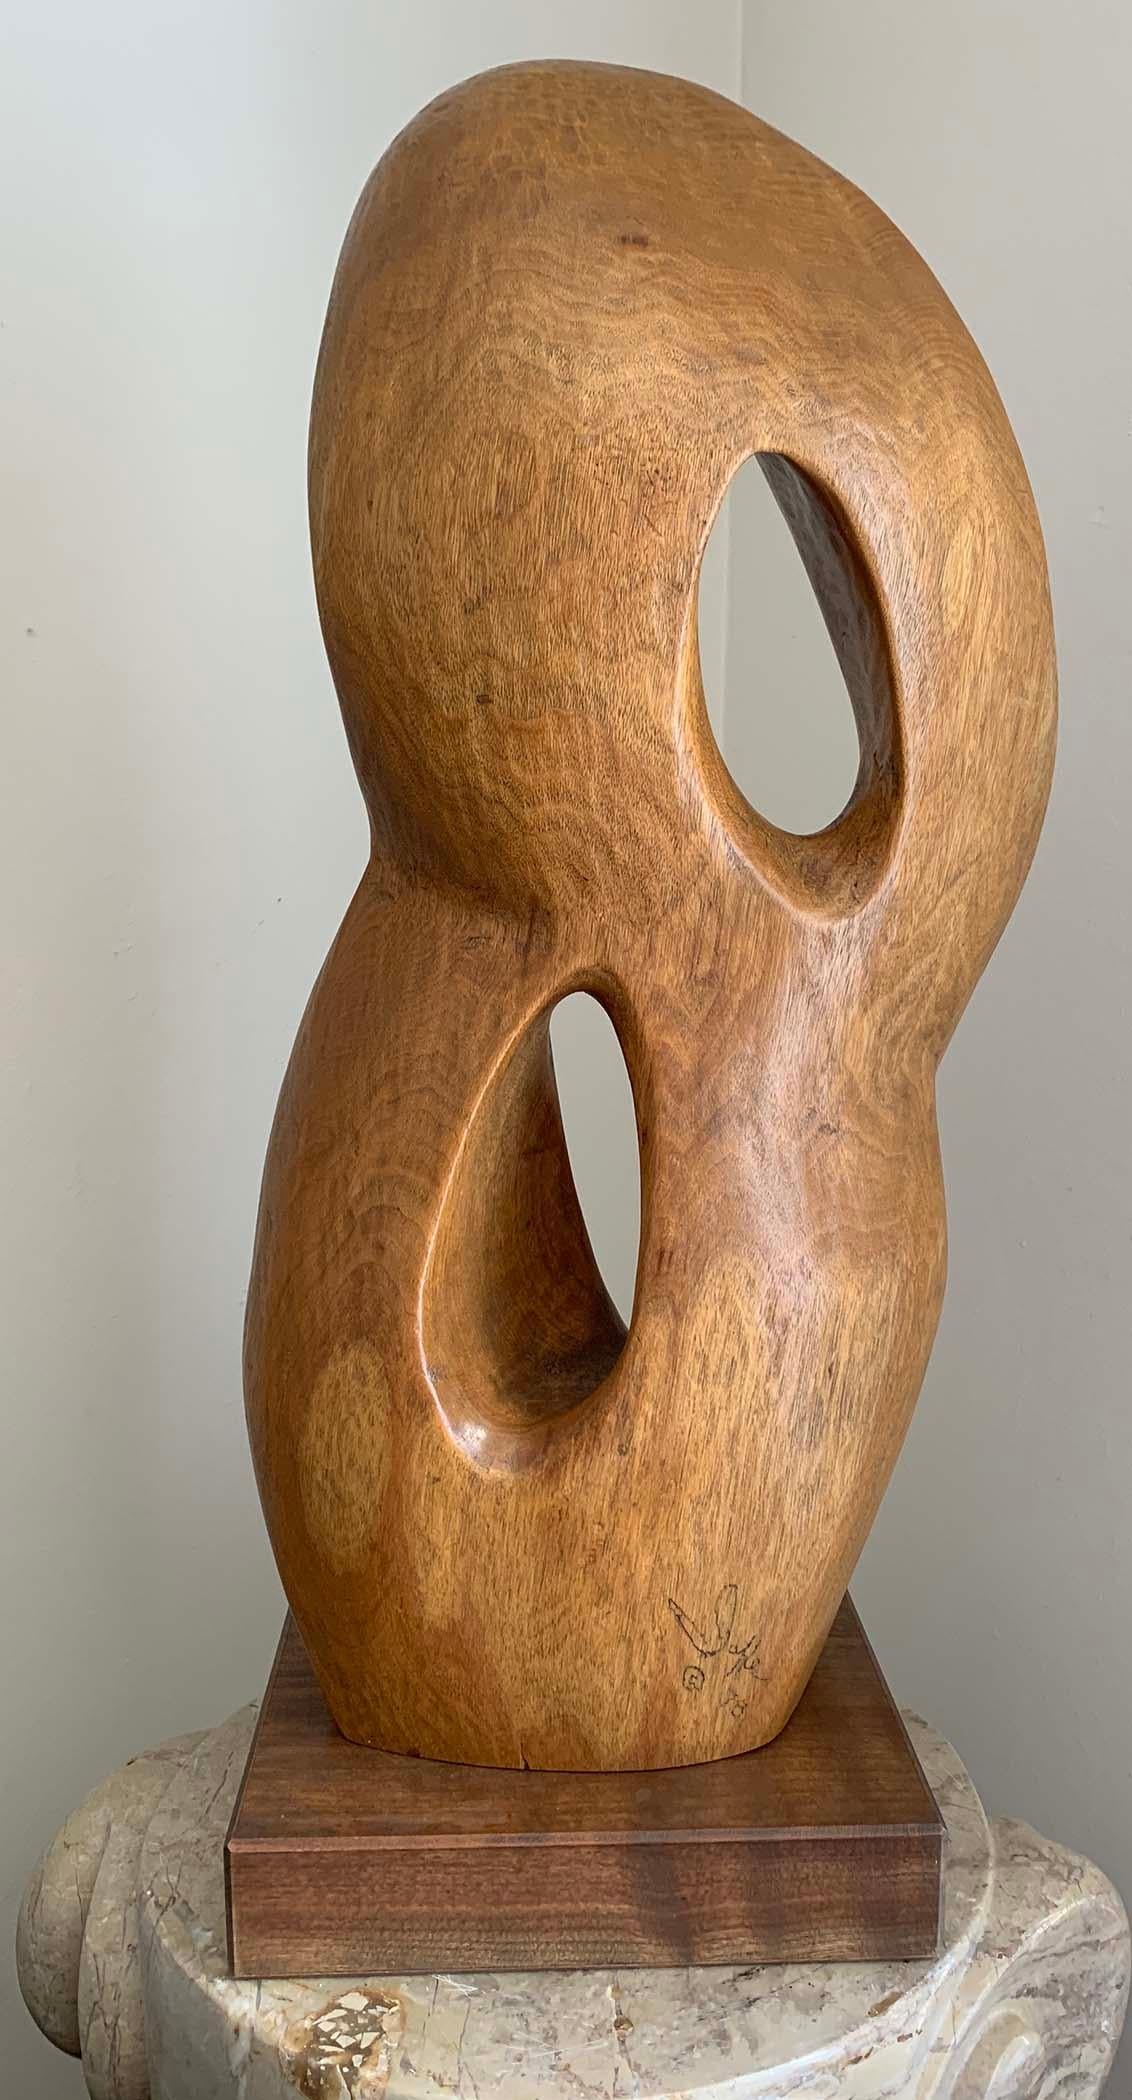 Abstract Form - Sculpture by Sylvia jaffe